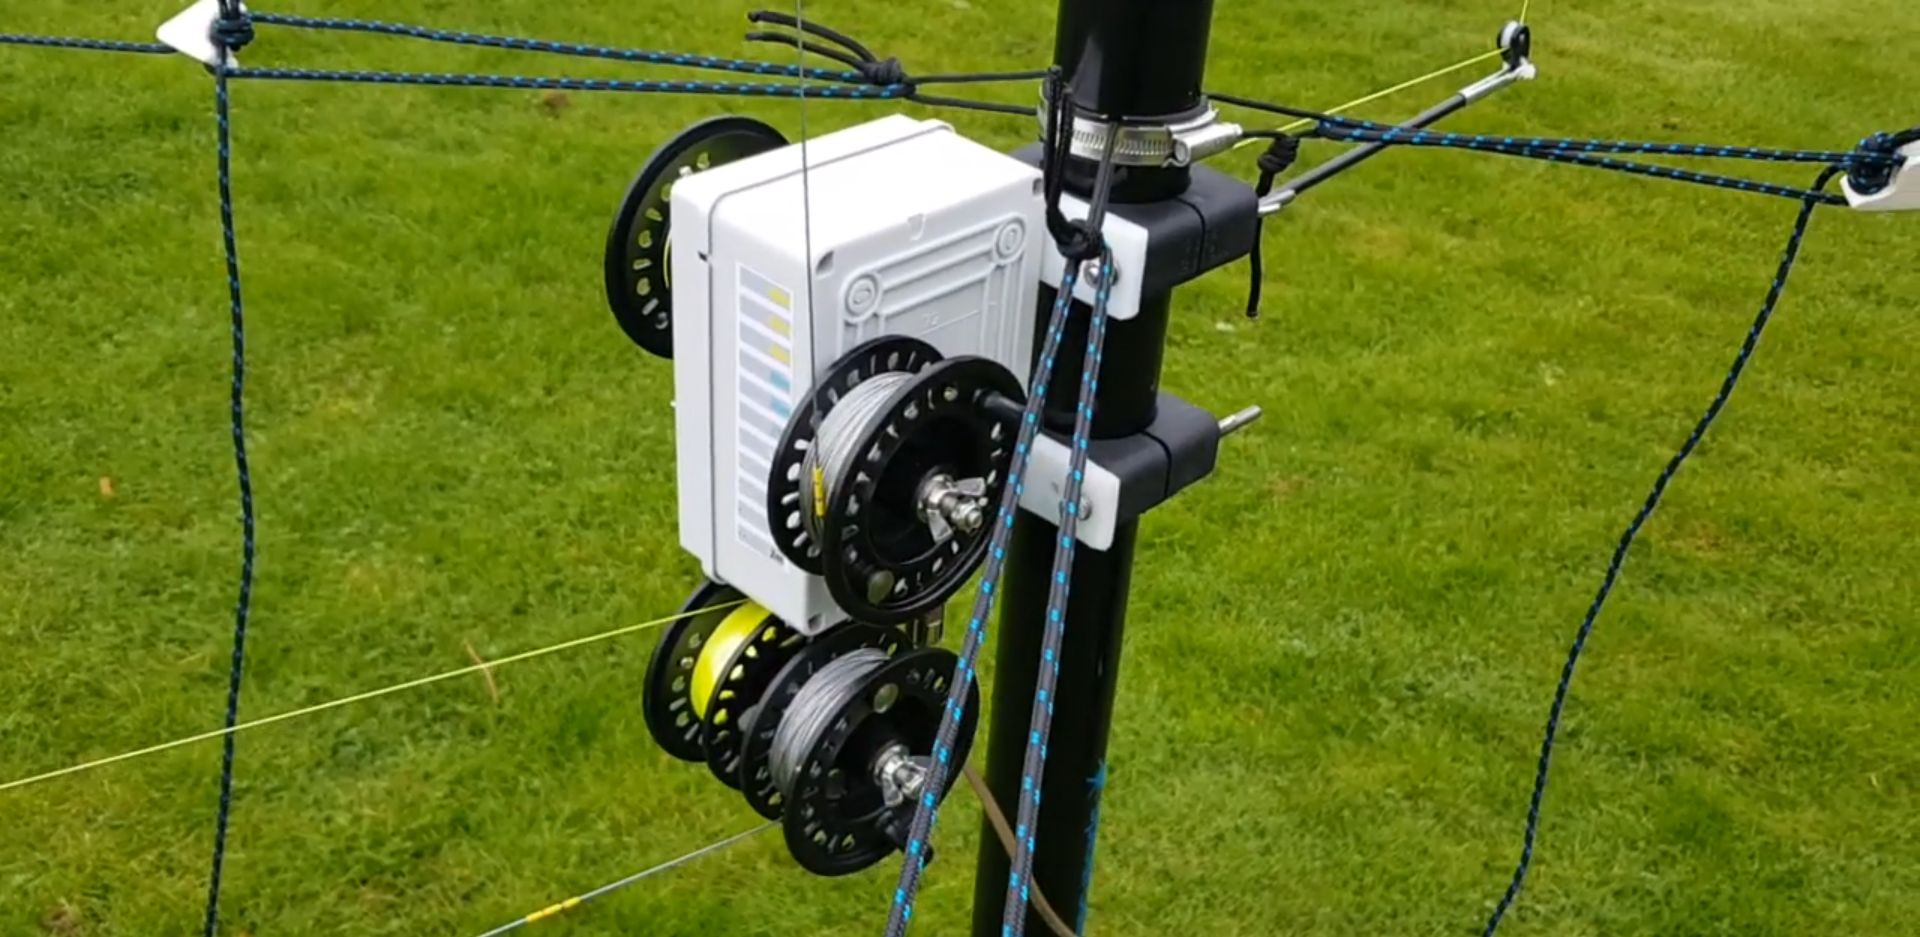 Intercontinental Radio Communications With The Help Of Fly Fishing Reels